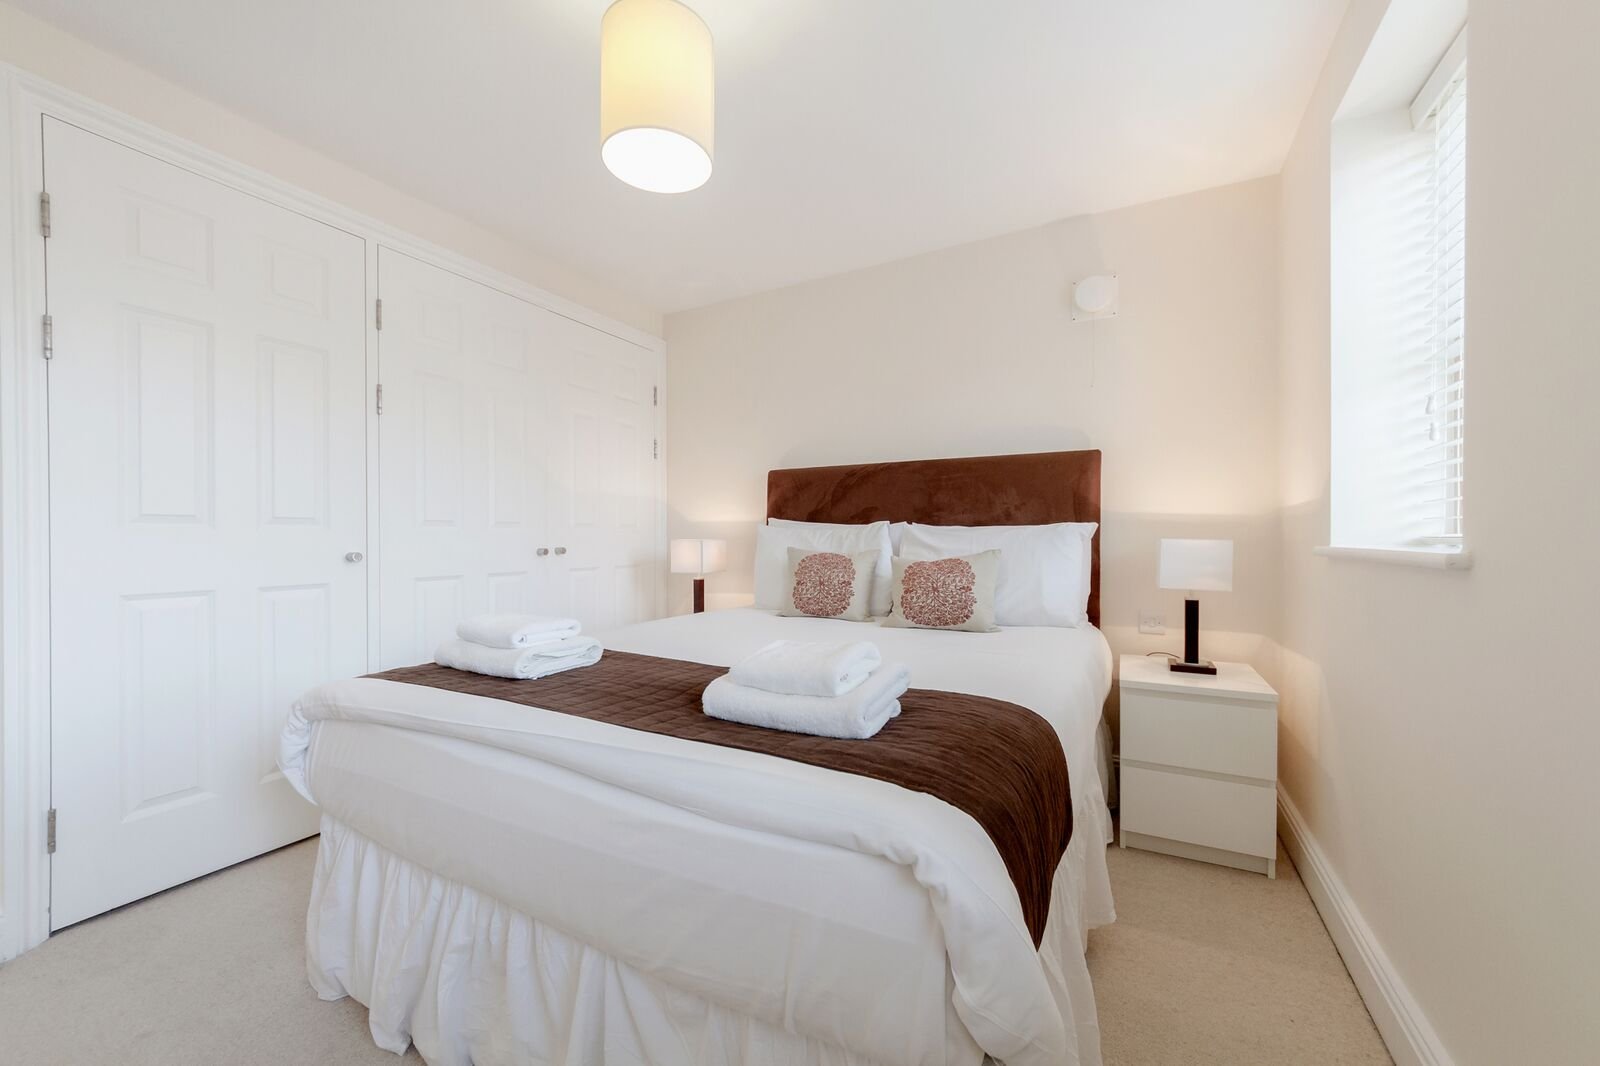 Modern Wimbledon Serviced Apartments - The Courtyard - Book Now With Urban Stay For The Best Rates Guaranteed!!! - Free Wi-Fi - Weekly Clean